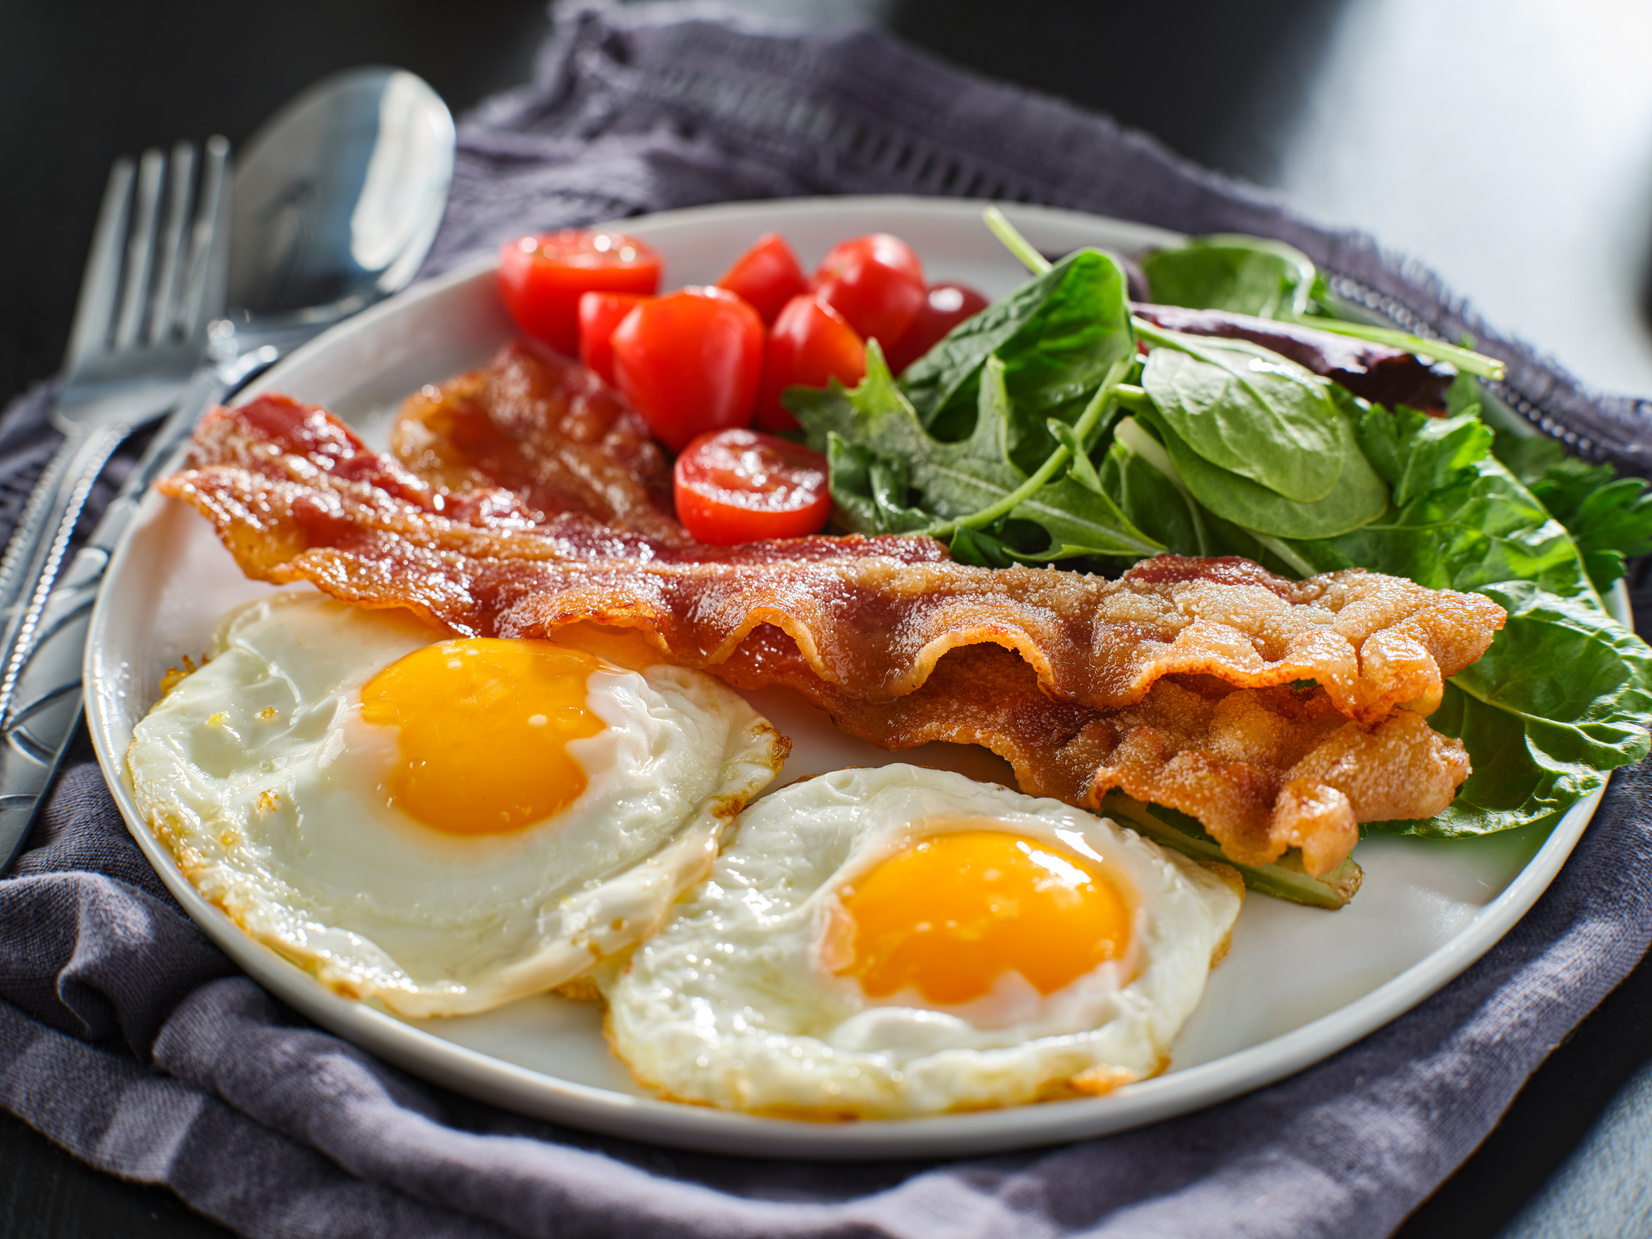 Keto Low Carb Breakfast with Eggs, Bacon and Vegetables